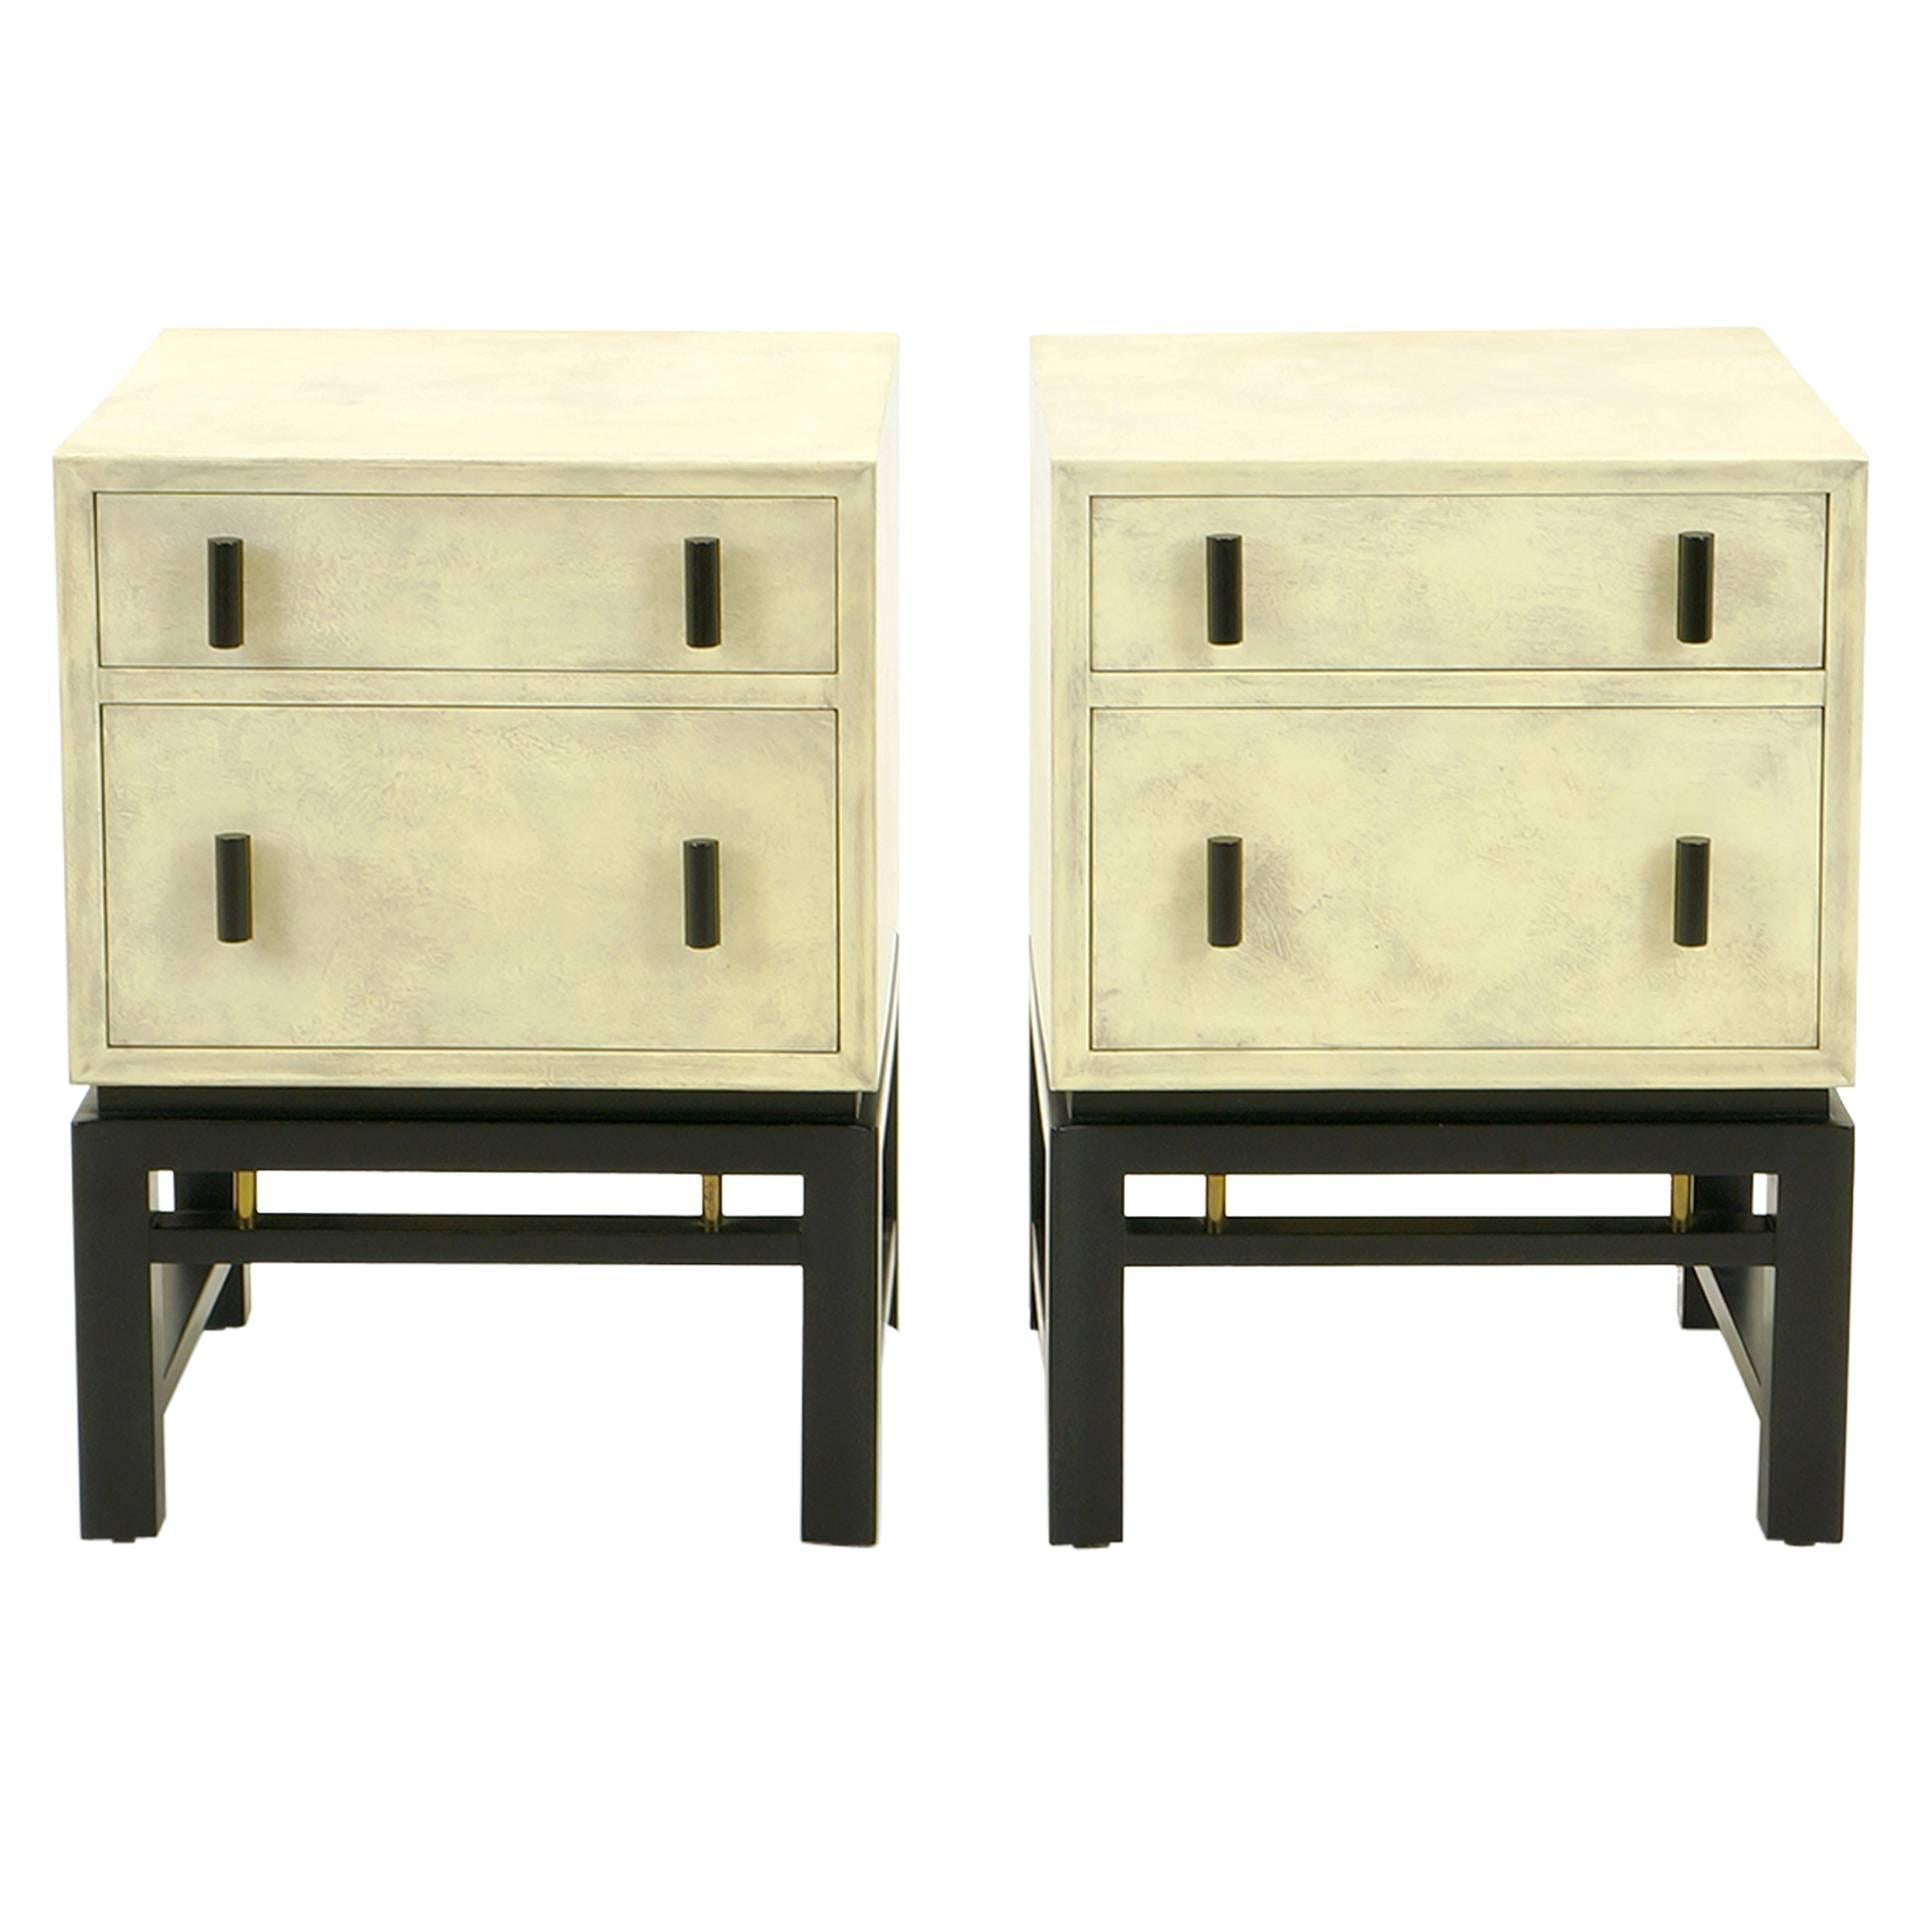 Pair of Nightstands Designed by Edward Wormley for Dunbar